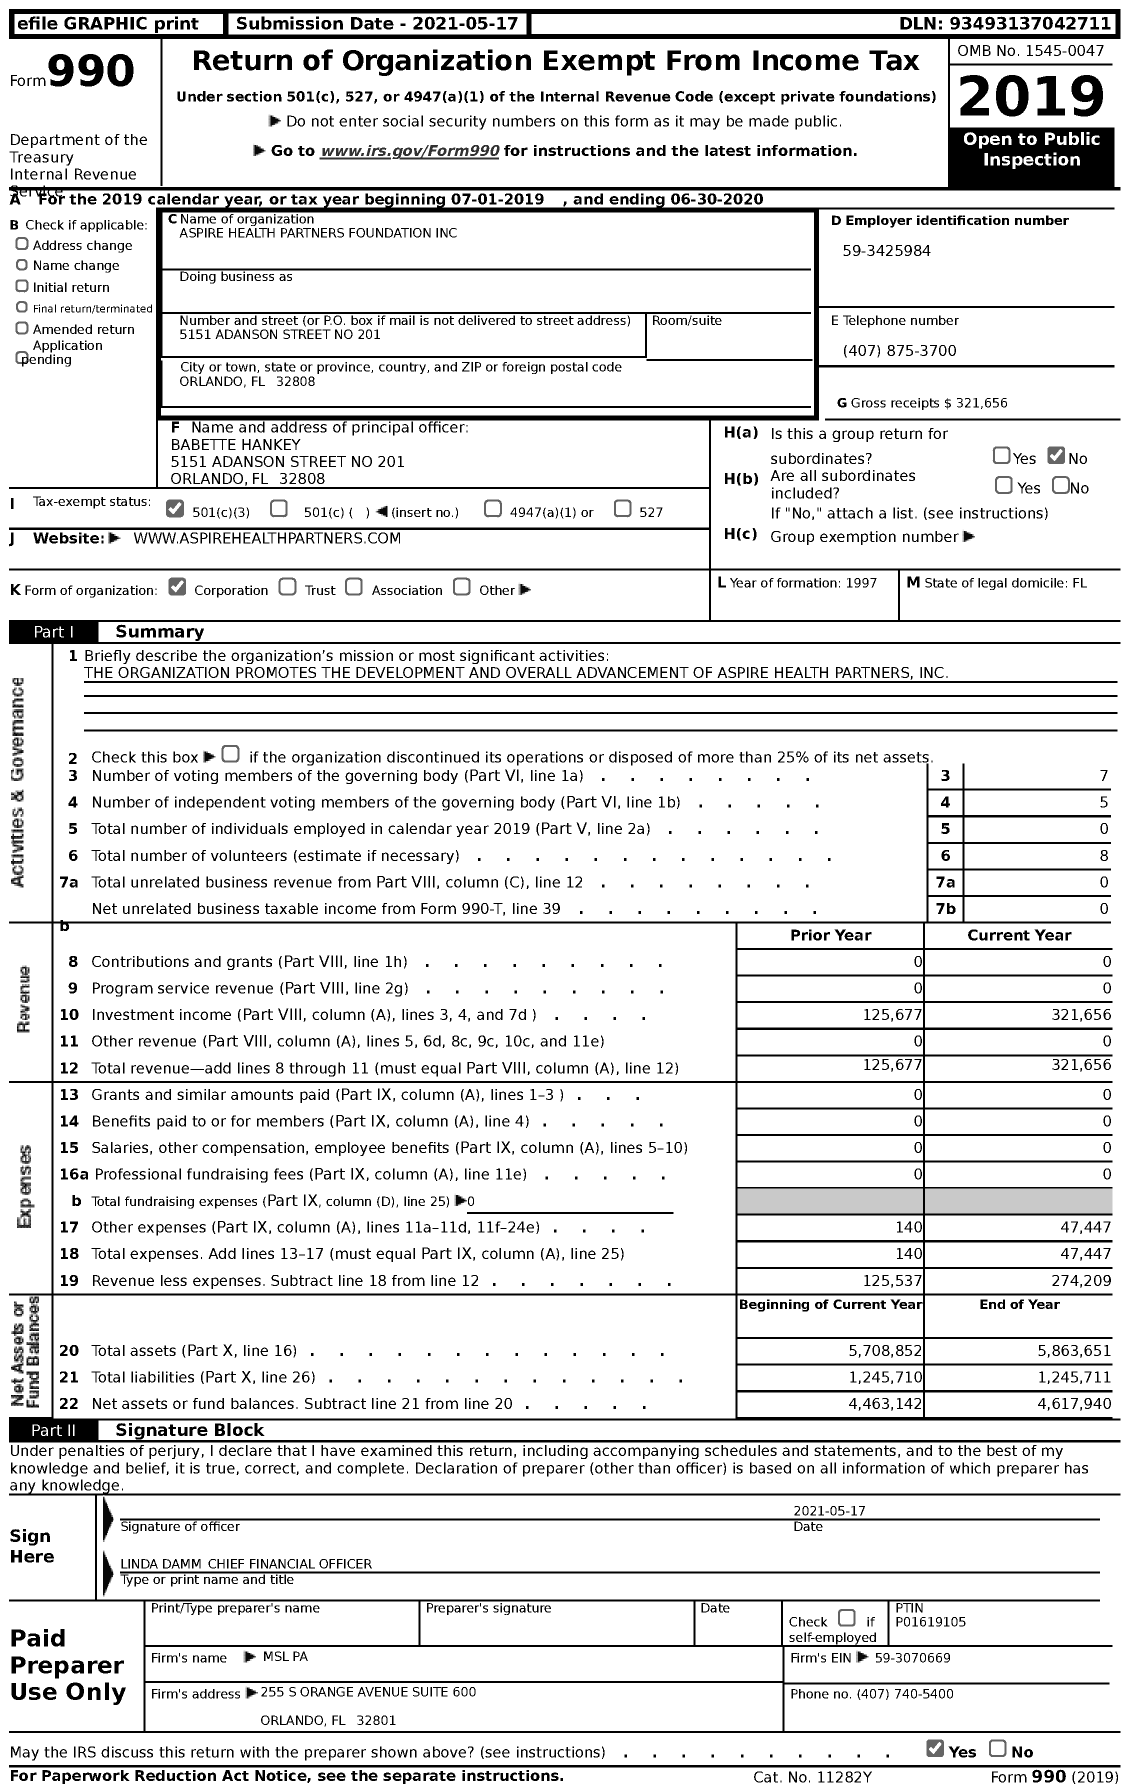 Image of first page of 2019 Form 990 for Aspire Health Partners Foundation